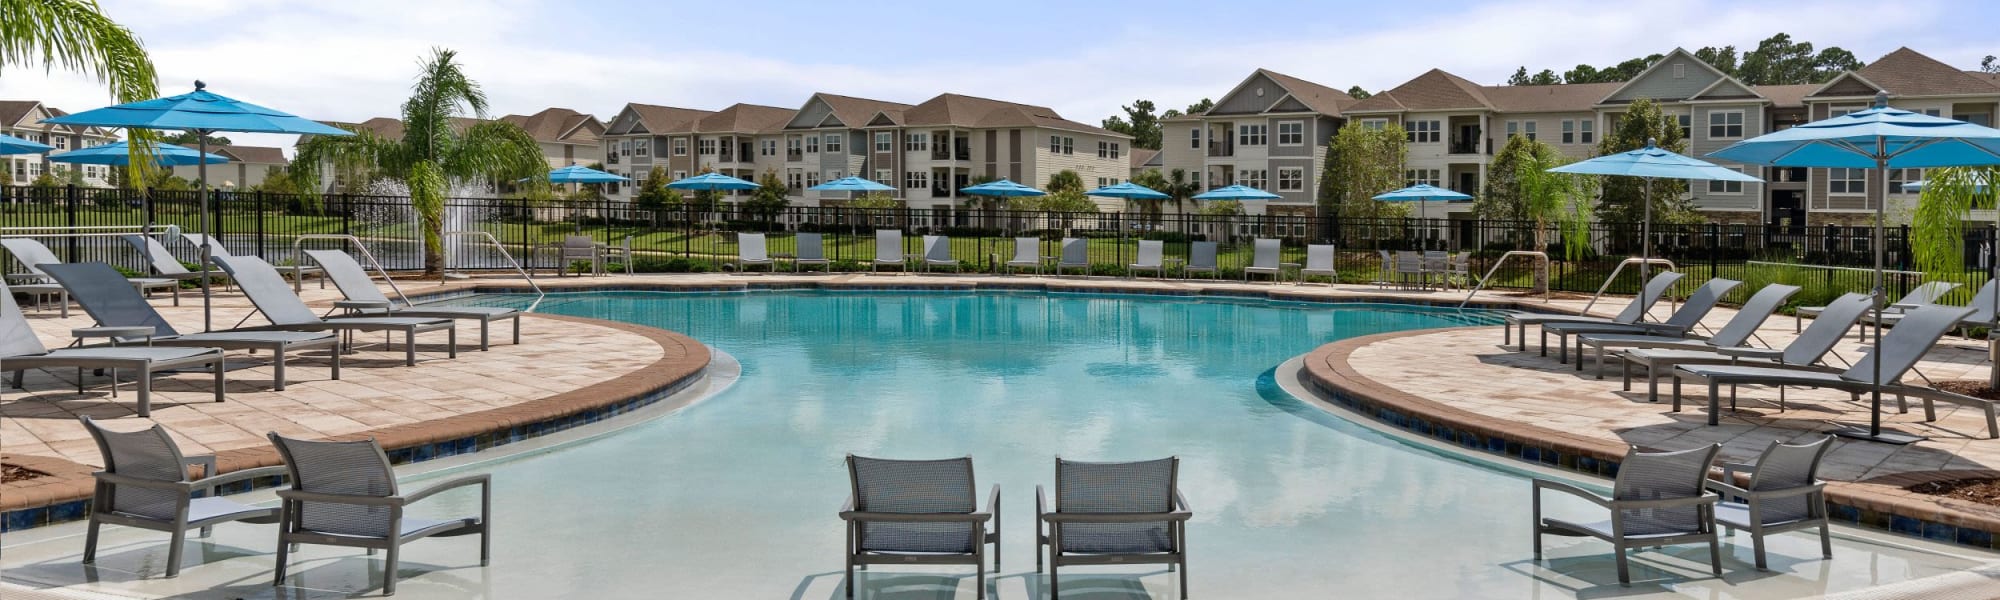 Schedule a tour of Lakeline at Bartram Park in Jacksonville, Florida